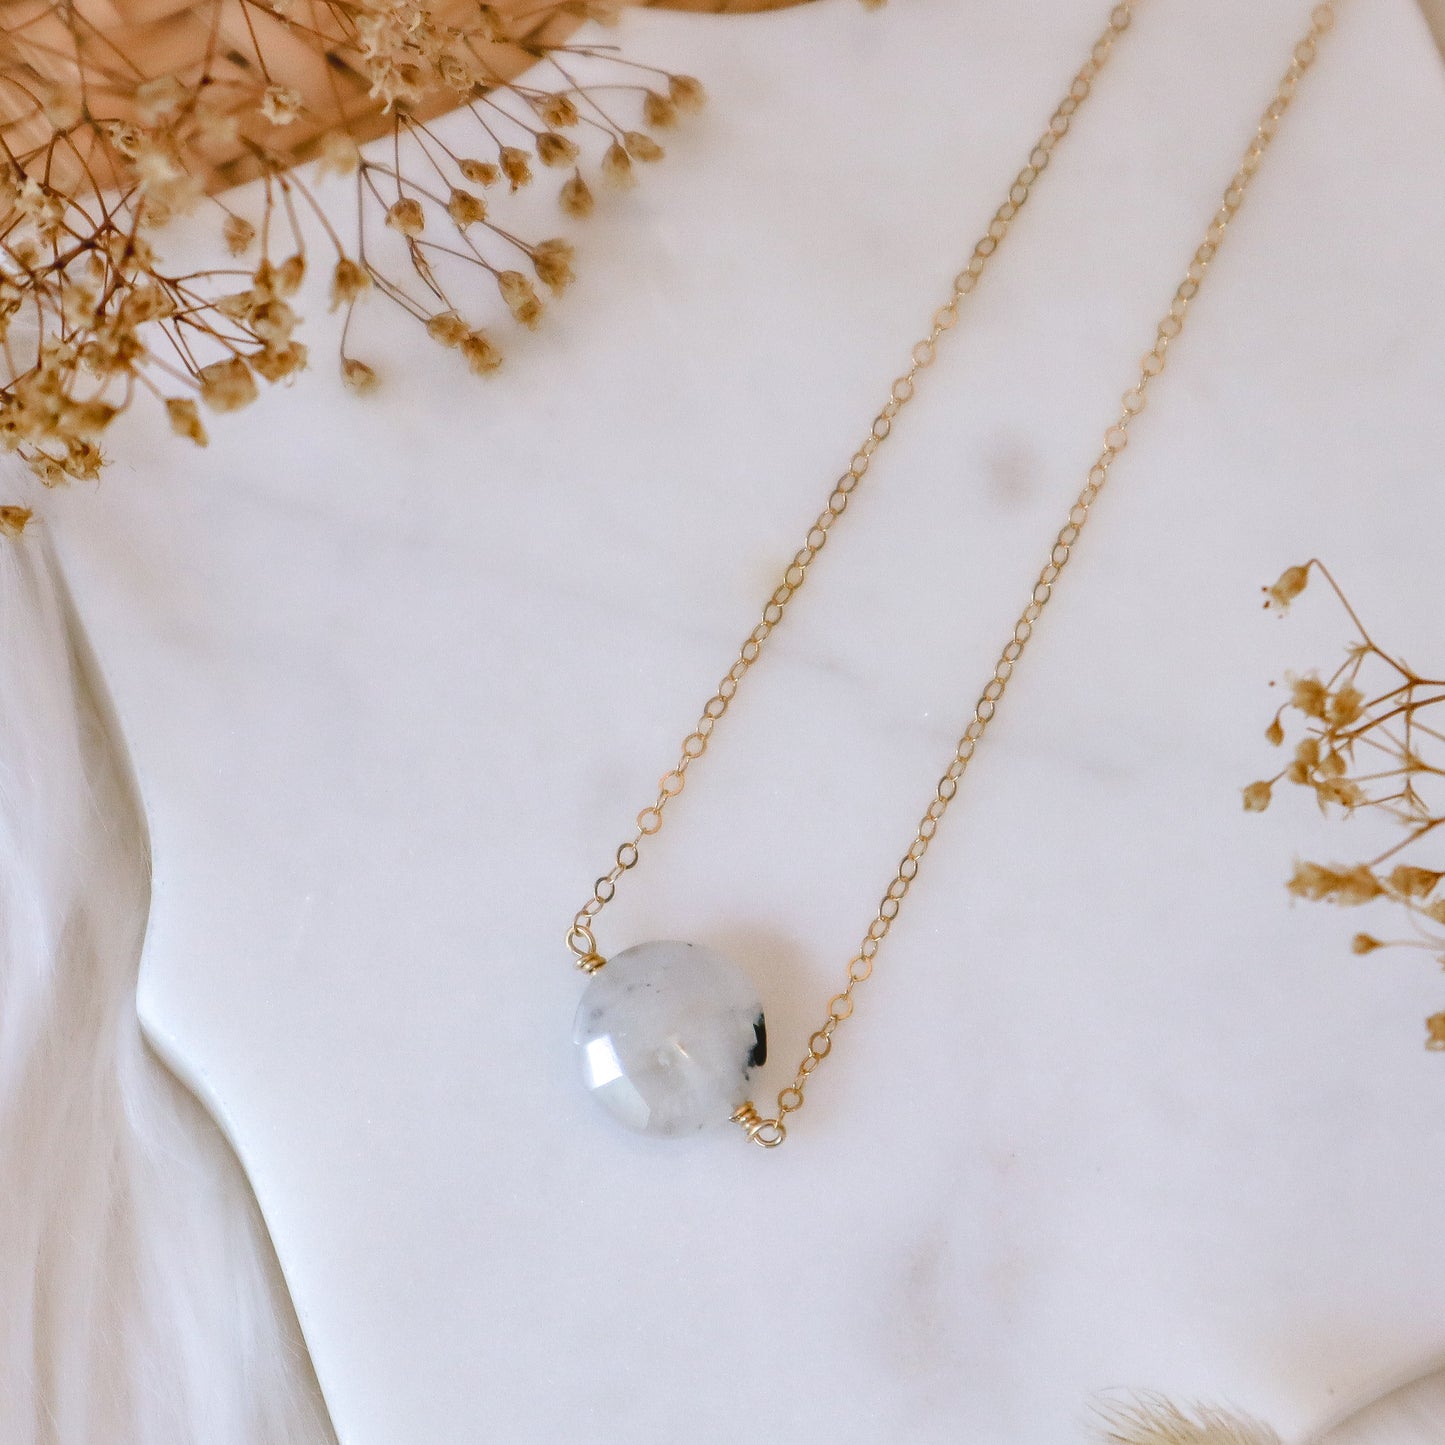 Rainbow Moonstone | Full Moon Necklace | Choose your length and metal